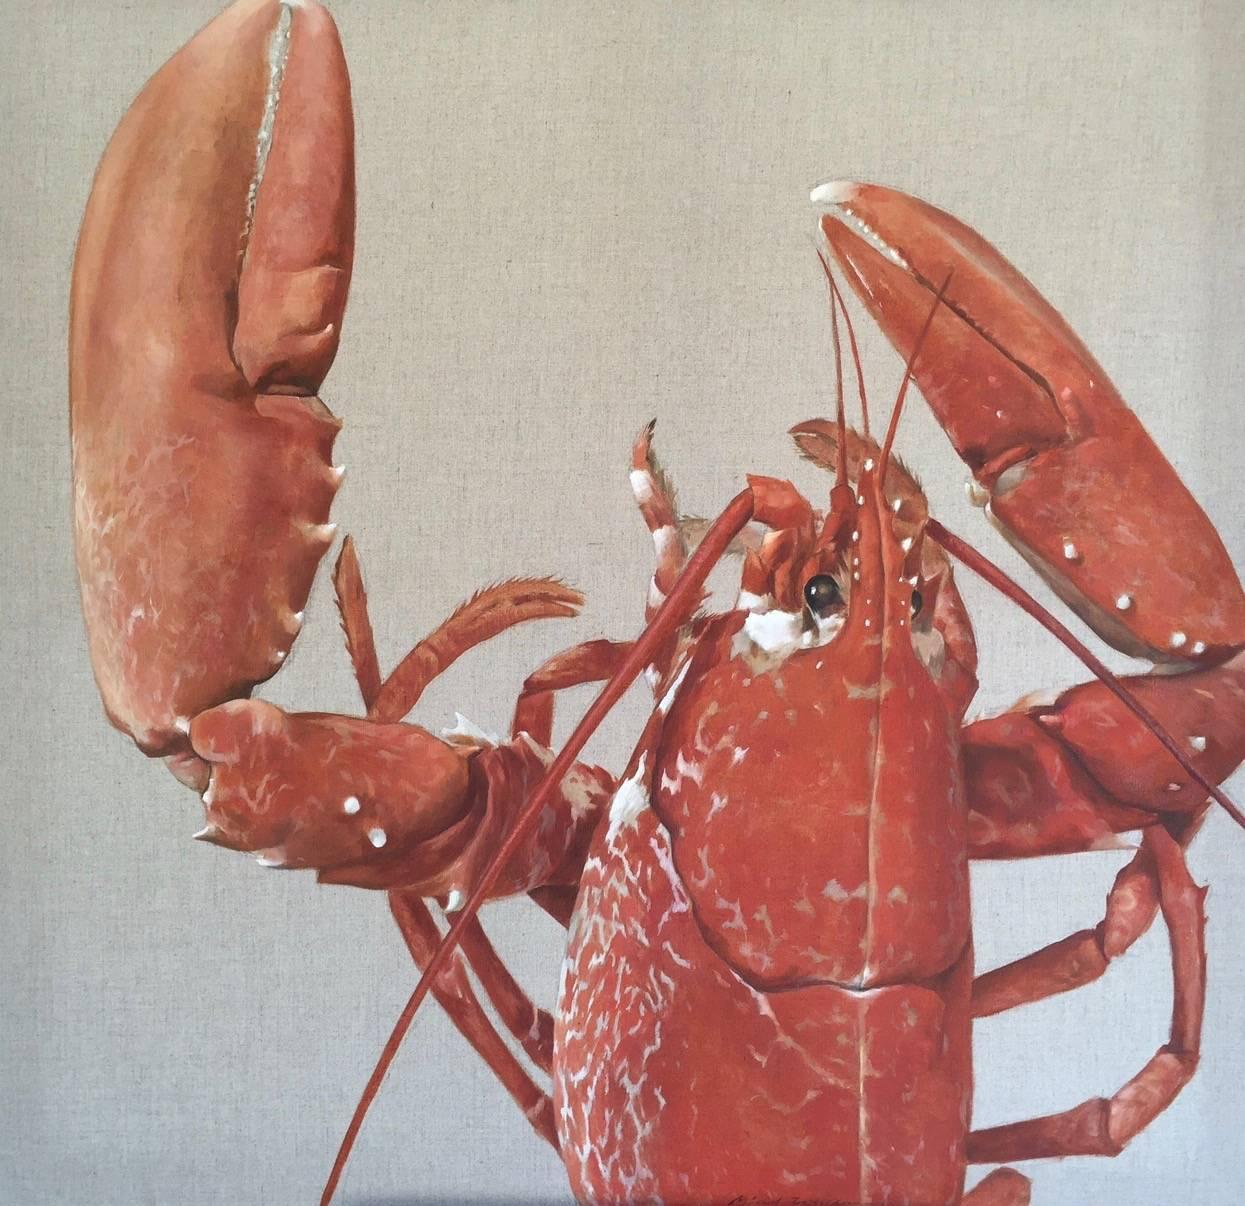 Michel Brosseau Animal Painting - "Keeper" photorealistic oil painting of red lobster on exposed linen